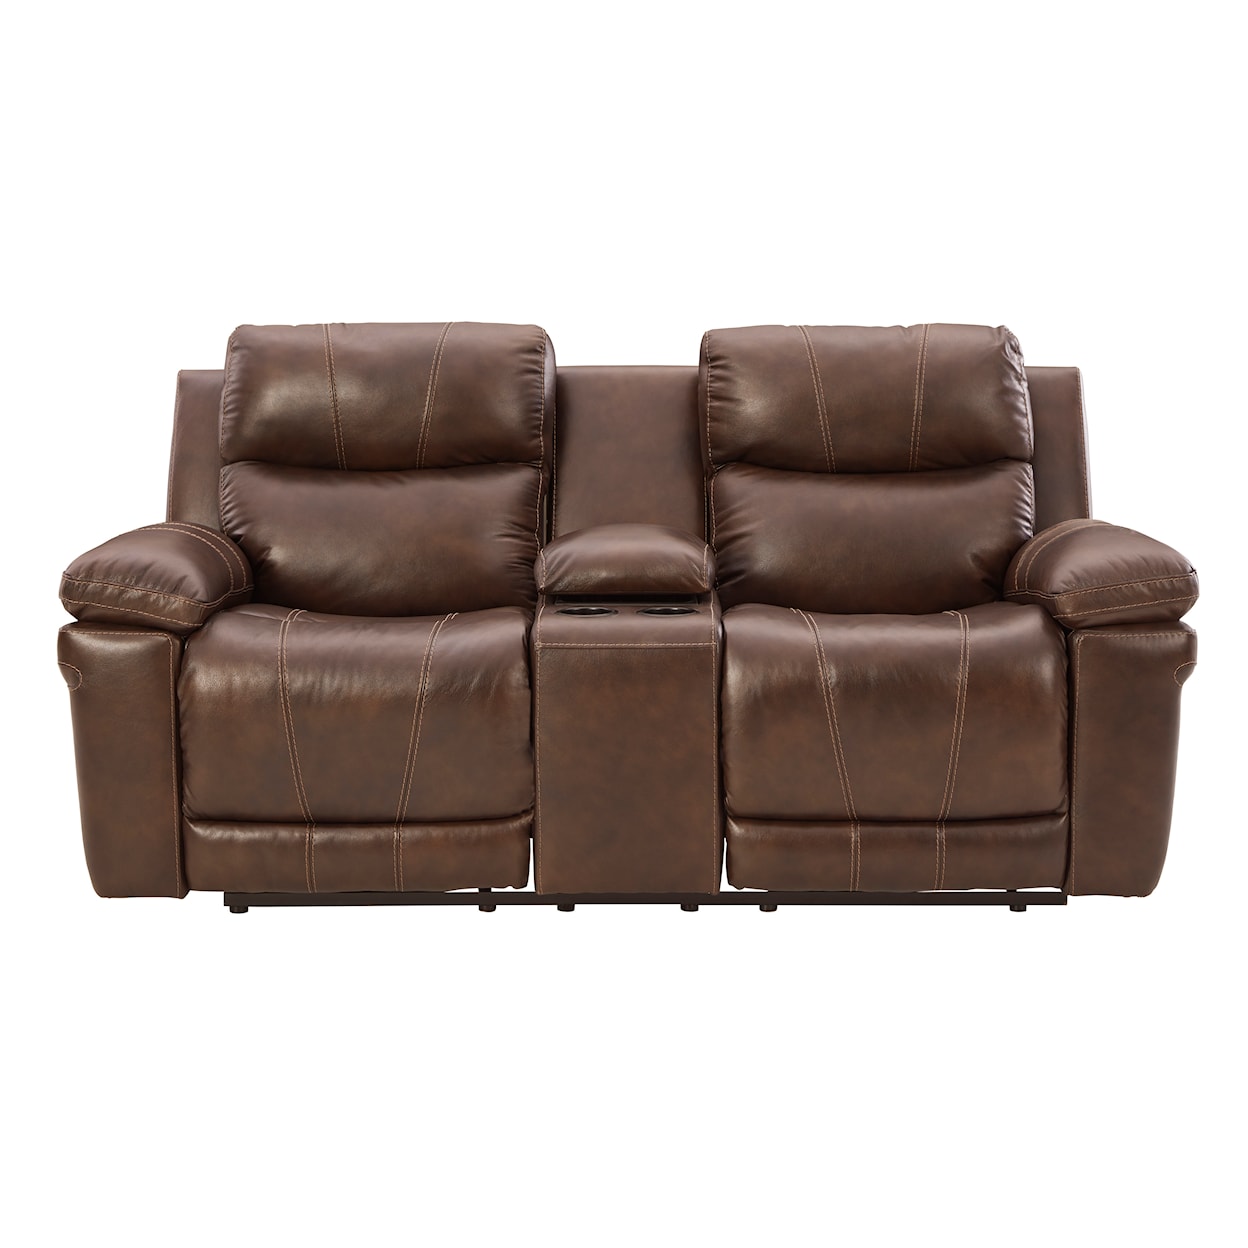 Signature Edmar Power Reclining Loveseat with Console